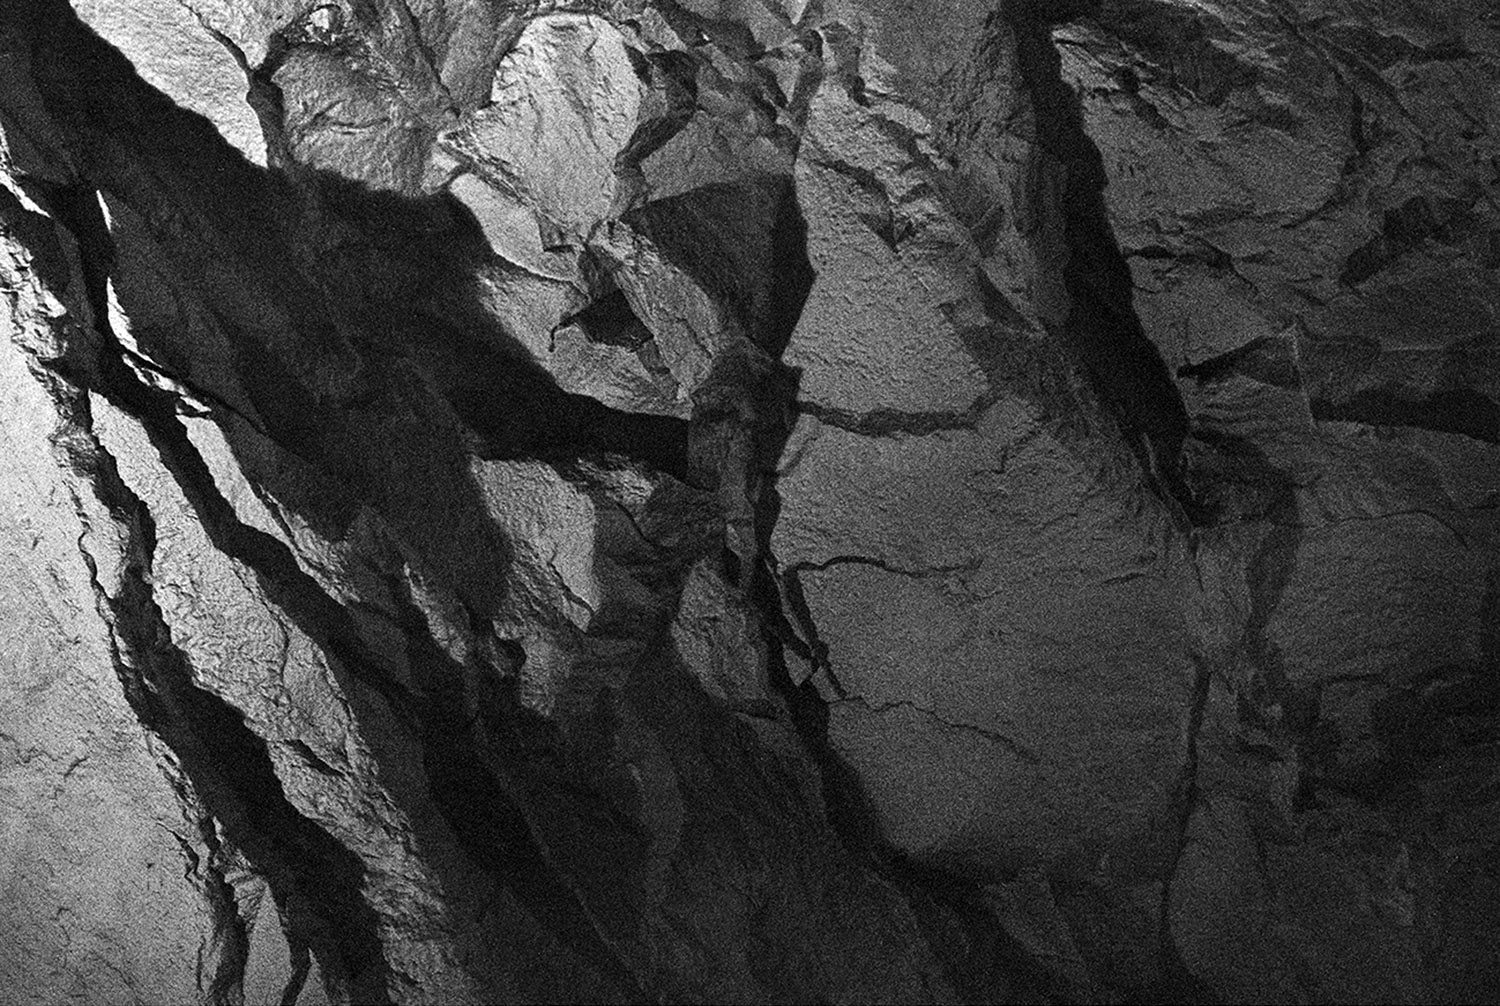   Source image no. two: photo of the under ground bedrock of Bergen.   Analogue 4x5, b/w photograph.  